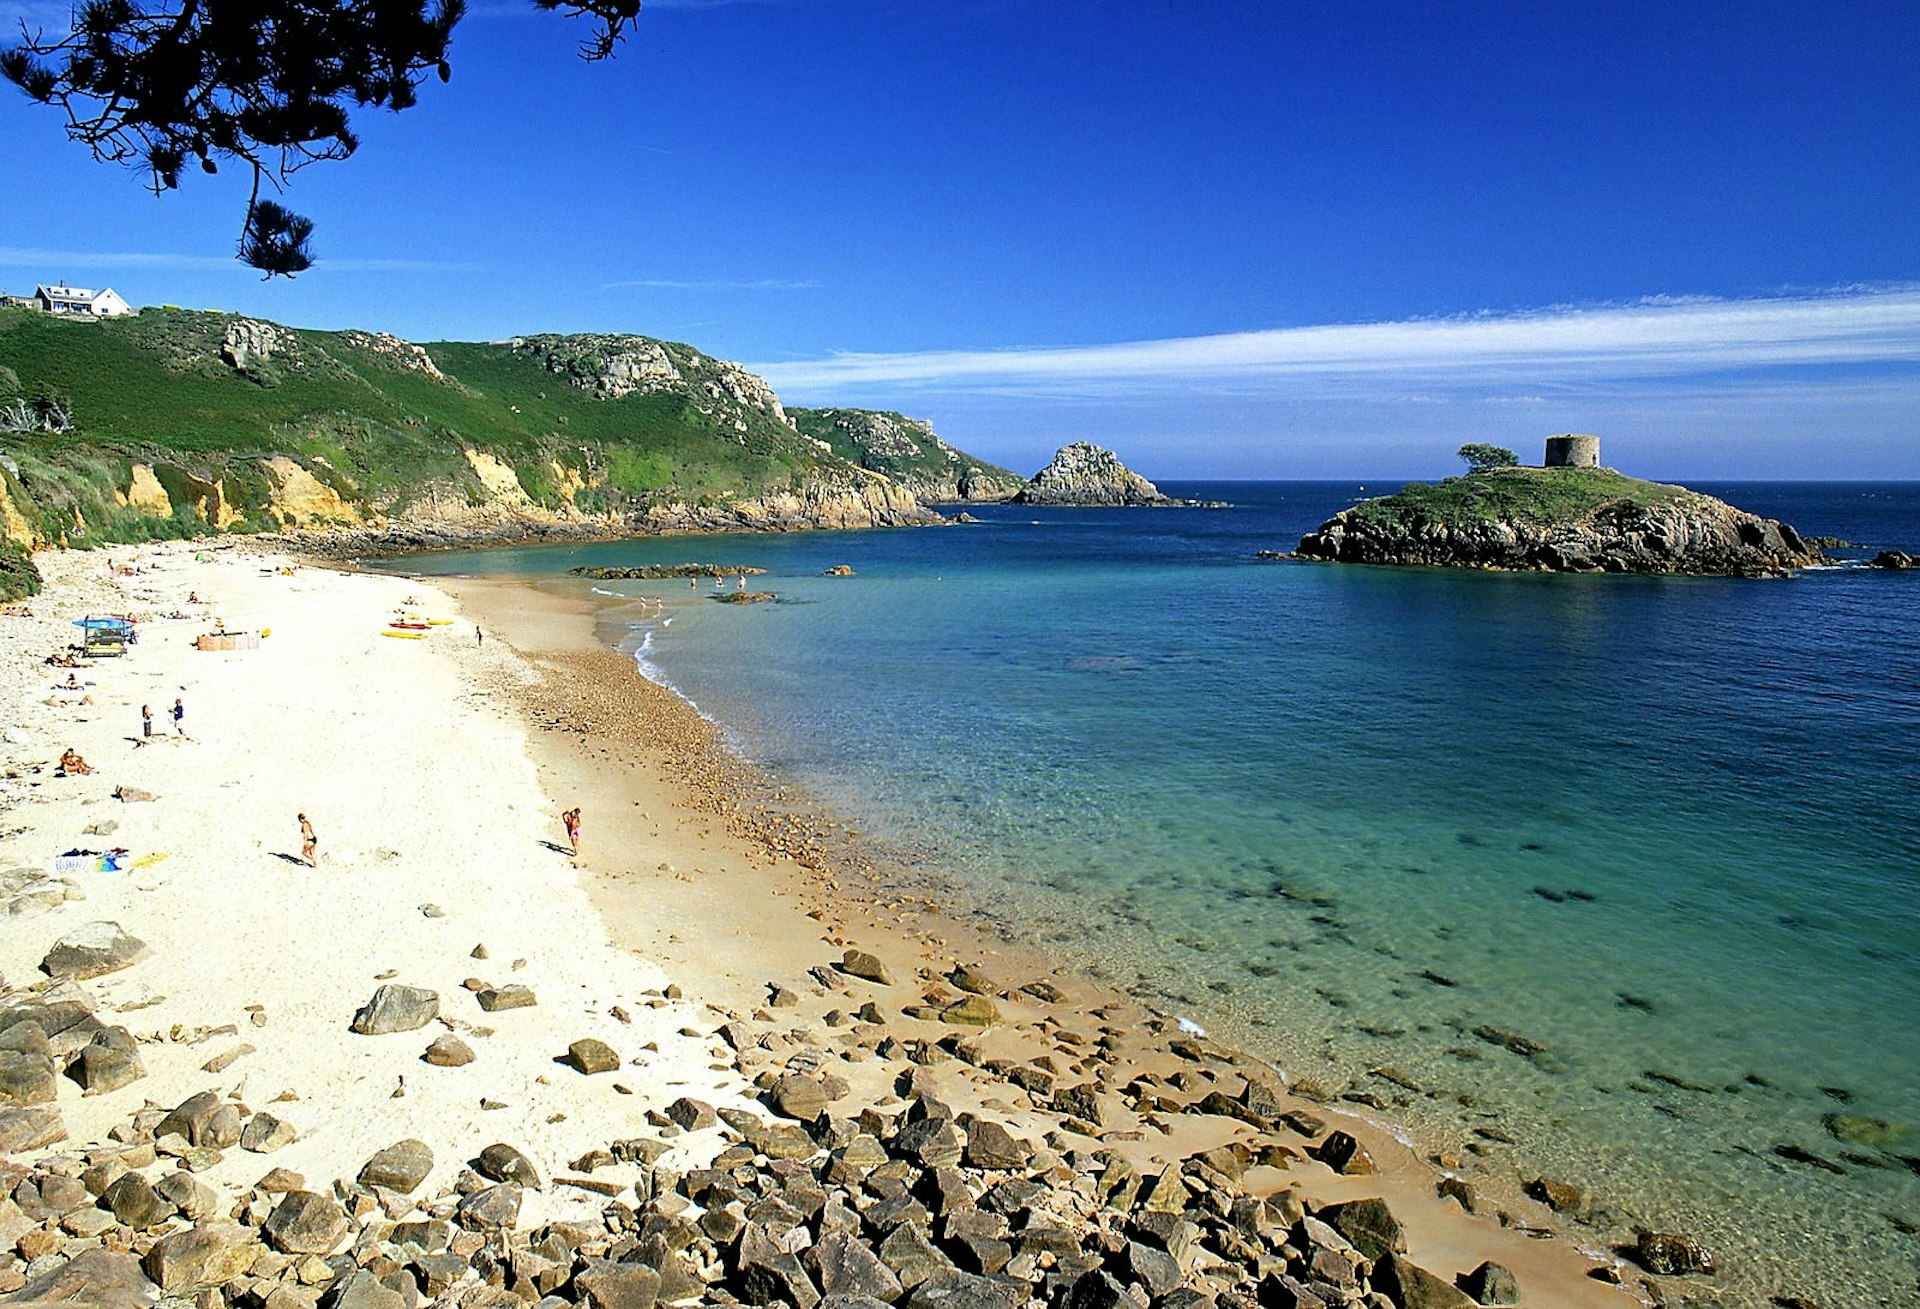 Spectacular beaches like Portelet on Jersey are one of many reasons to visit the Channel Islands © Doug Pearson / Getty Images